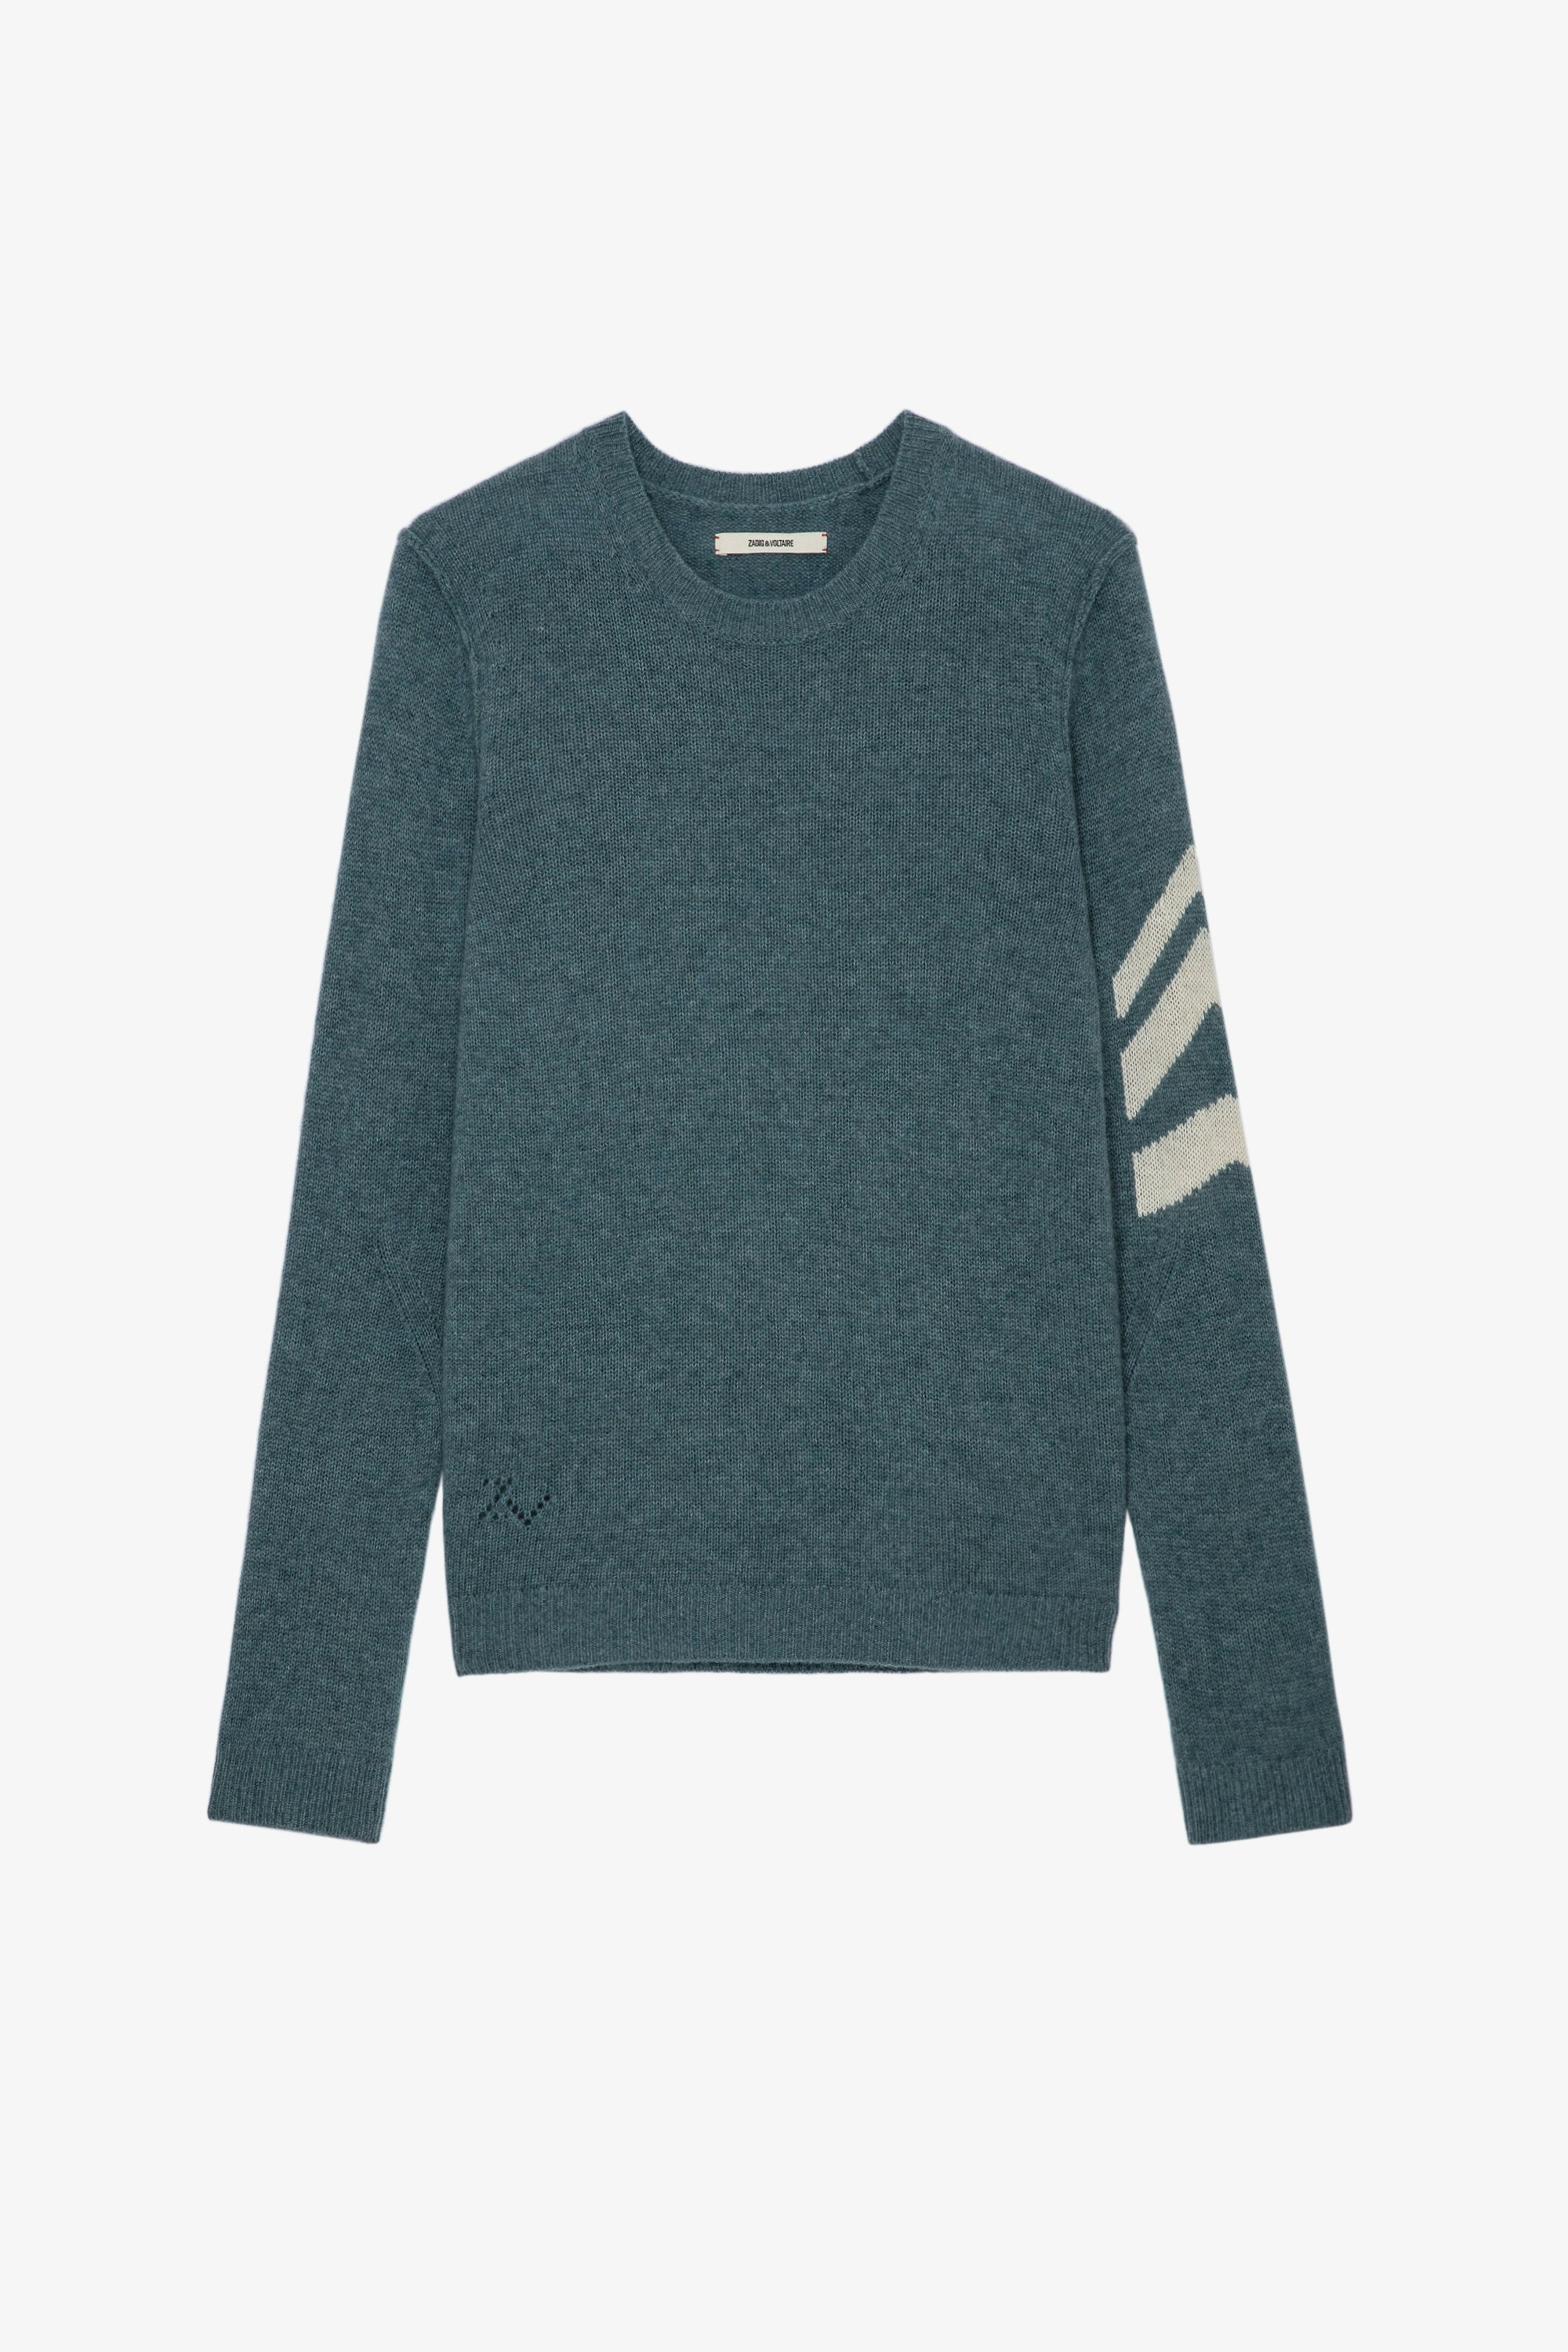 Kennedy Arrow カシミヤ ニット Men’s green cashmere jumper featuring arrows on the sleeve